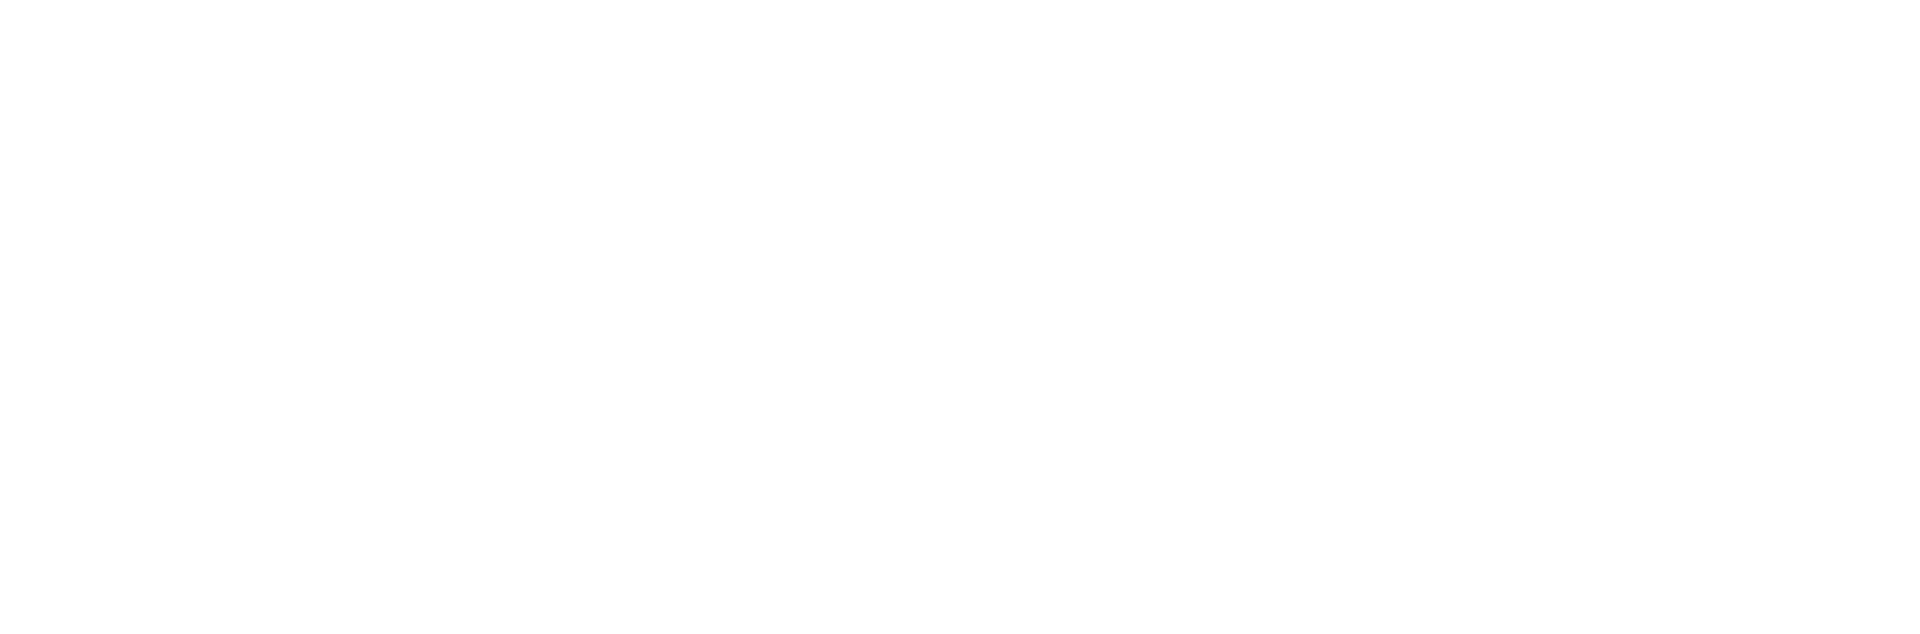 Lokal - Digital Marketing and E-Commerce Philippines